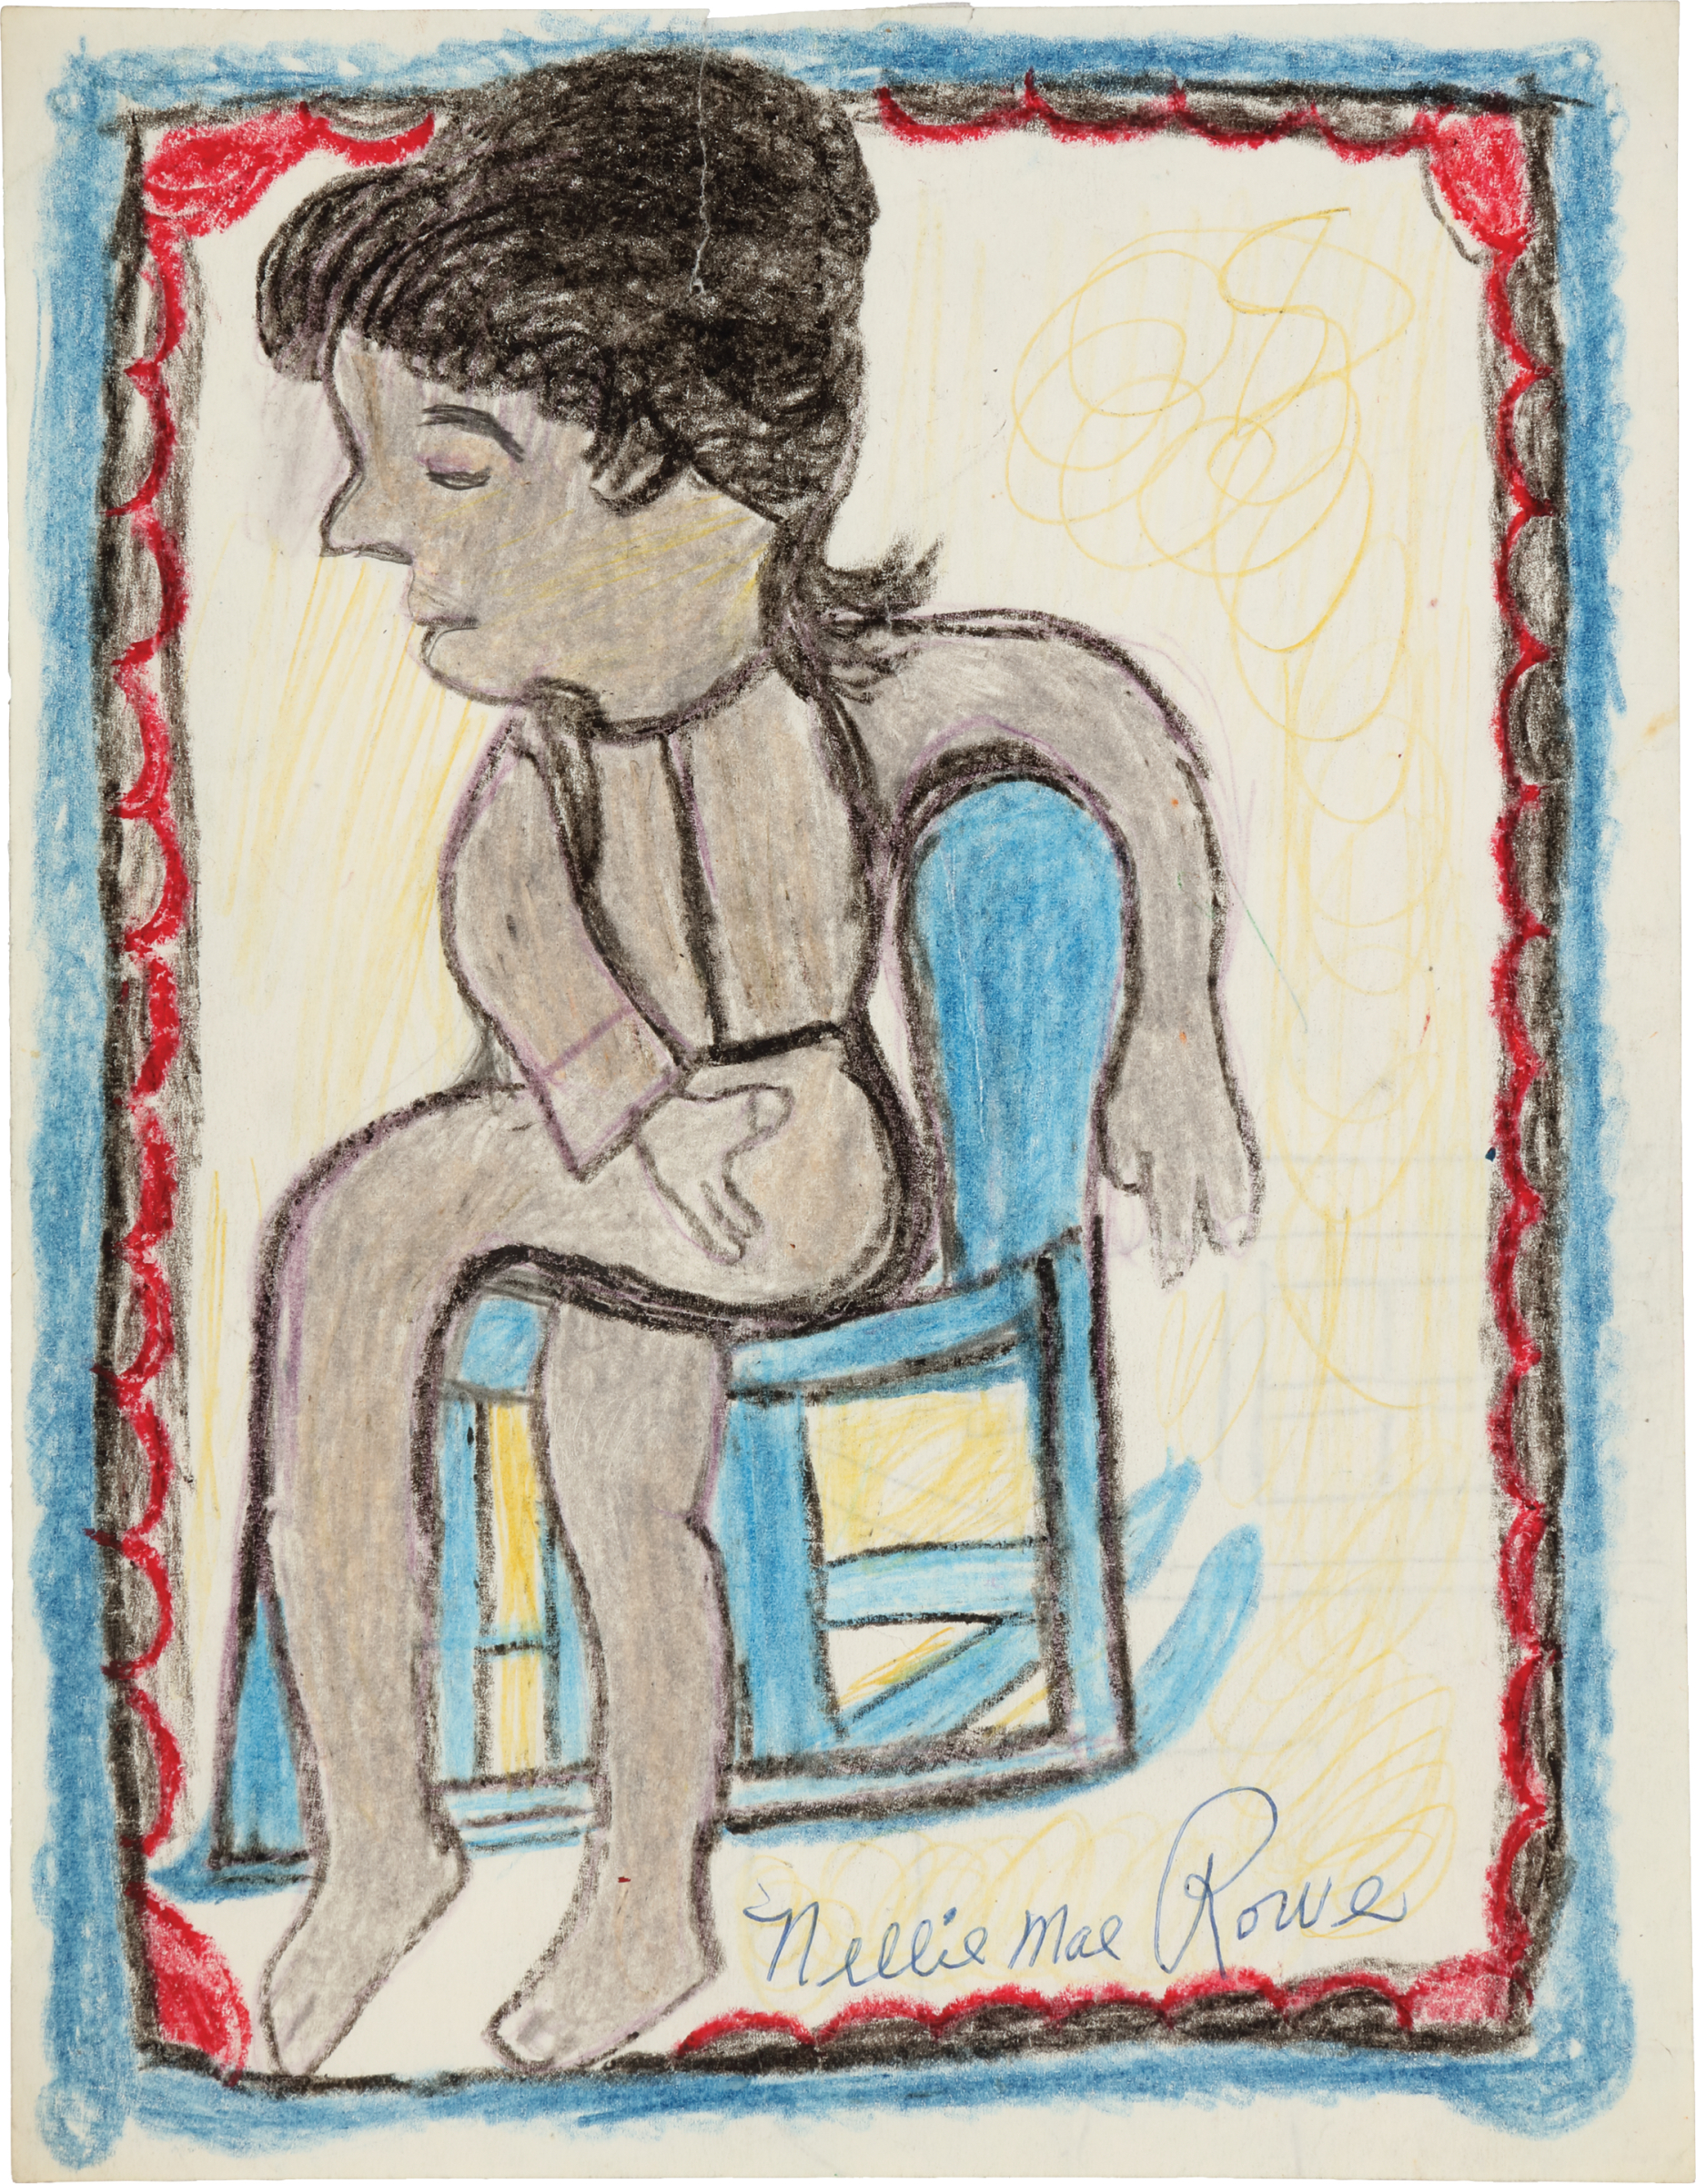 A grayish woman with black hair and outlining sits disjointedly in a blue rocking chair; scalloped red and blue border.